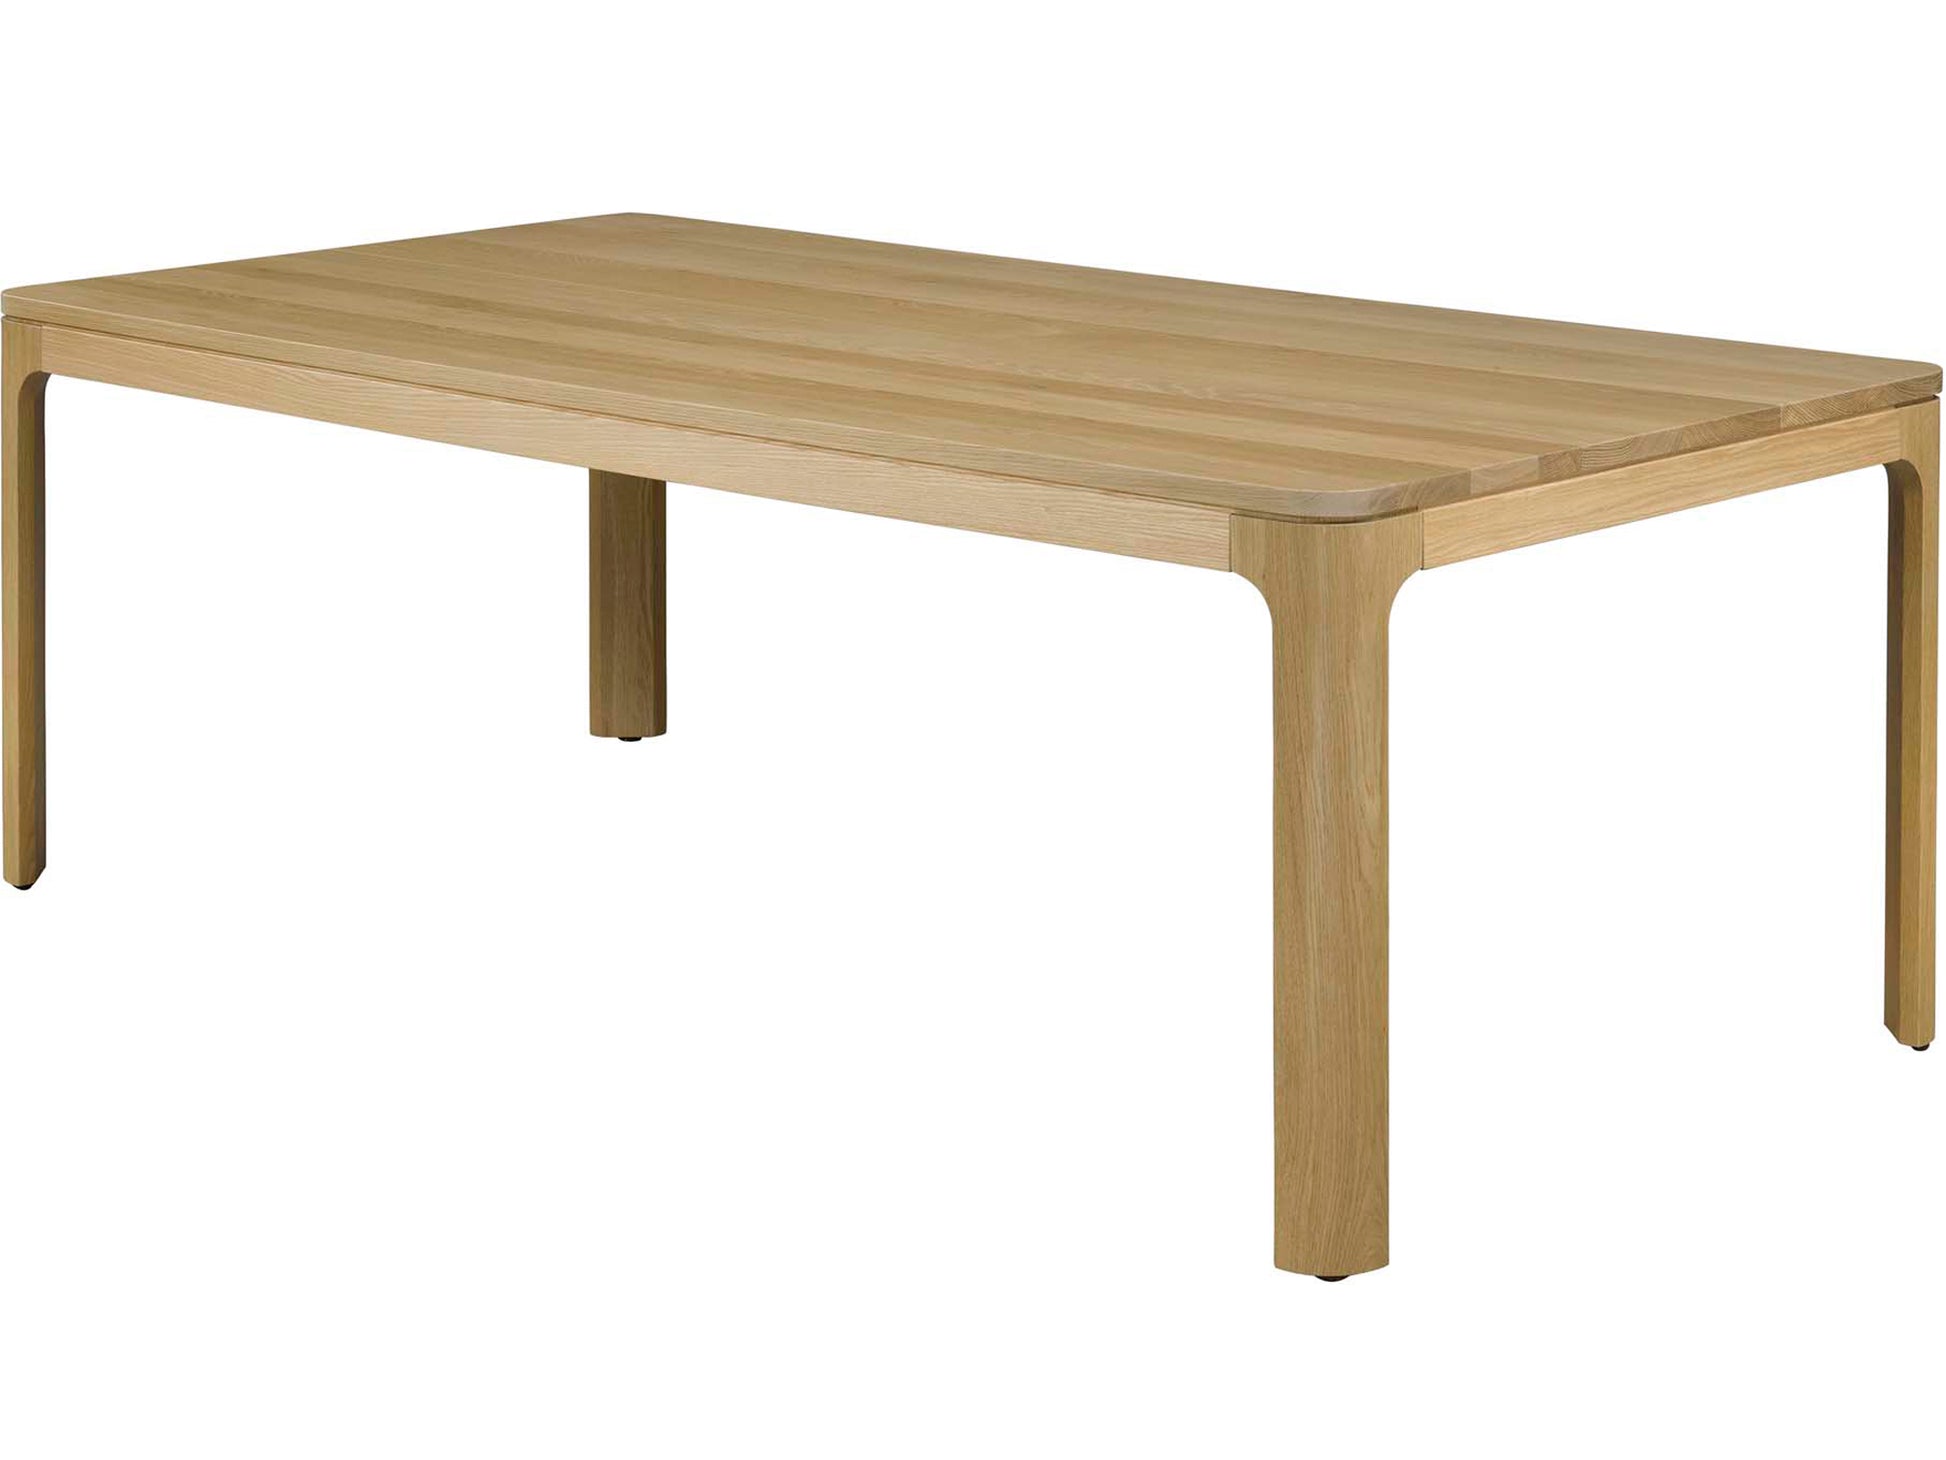 Naasko Dining Table - made of solid wood, built to order, Canadian made.